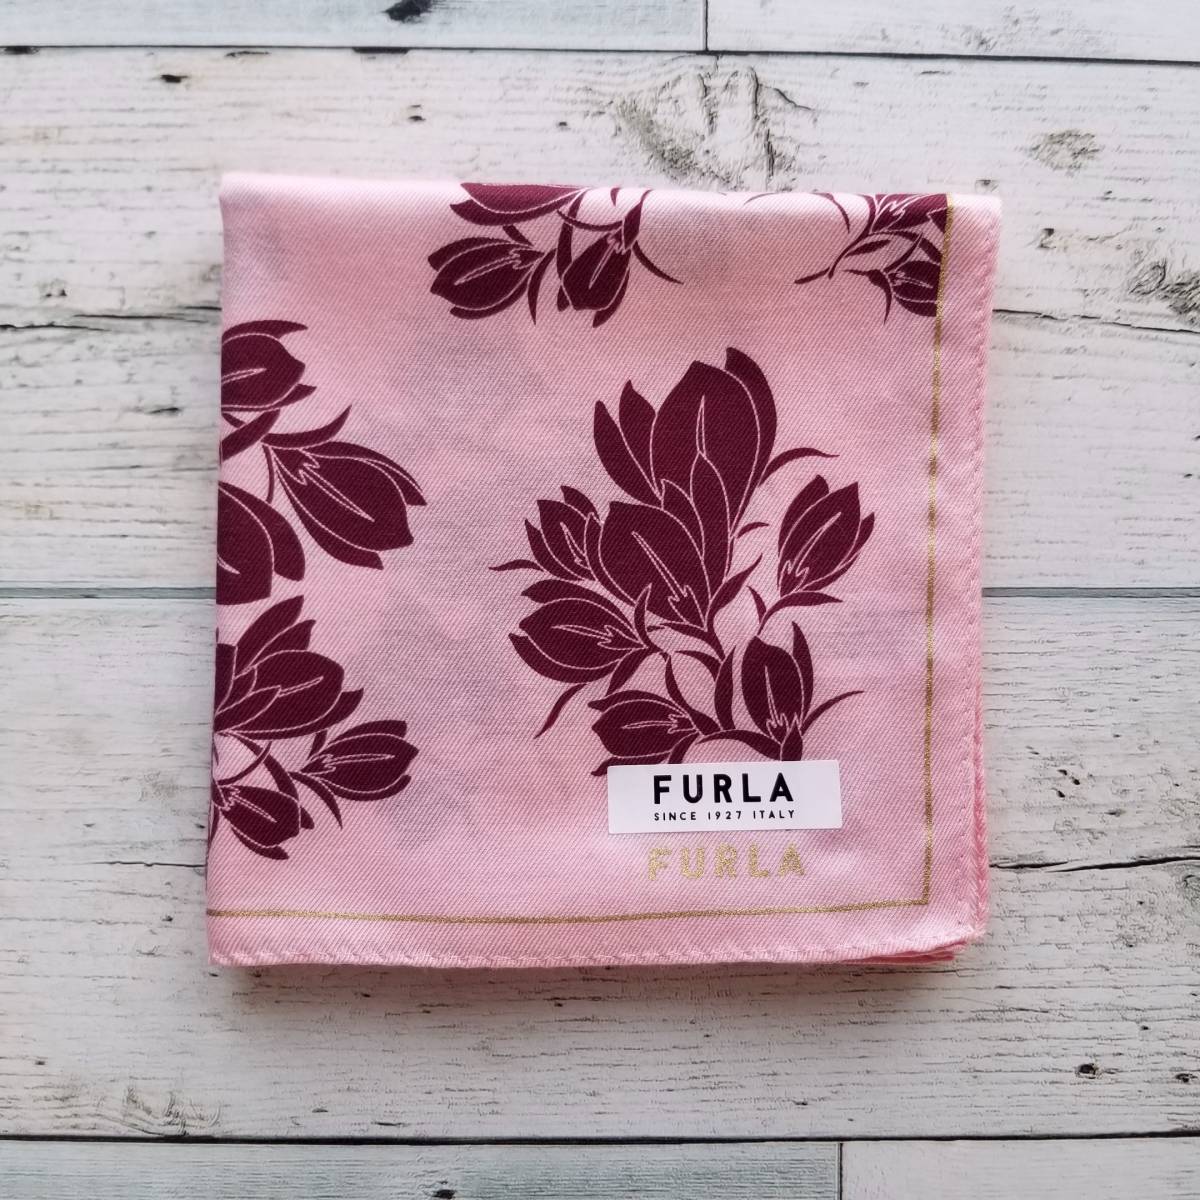  silk cotton [ free shipping * anonymity delivery ] new goods *FURLA Furla * handkerchie large size pink floral print flower print handkerchie -f small scarf 